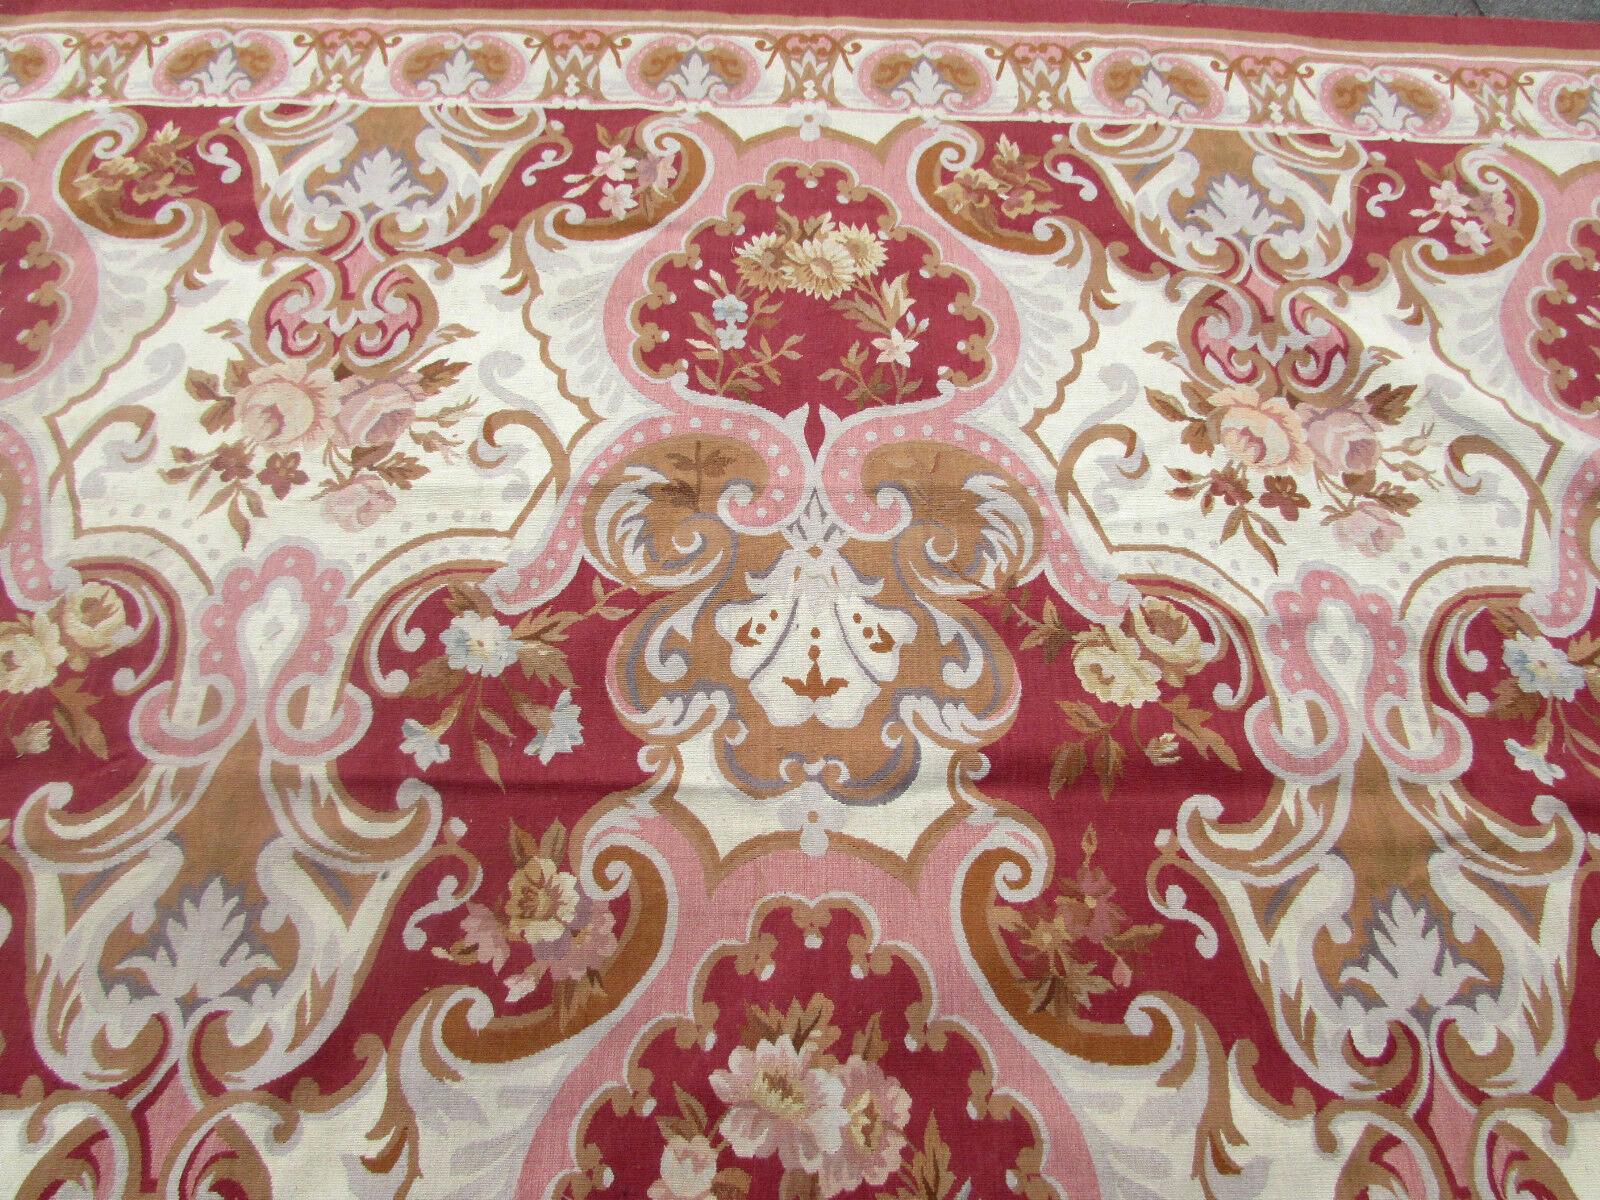 This exquisite handmade vintage French Aubusson rug from the 1980s is a true work of art. Measuring 8.9 feet by 12 feet (272cm x 366cm), it features a stunning design that is sure to impress anyone who sees it.

Made from high-quality wool, this rug